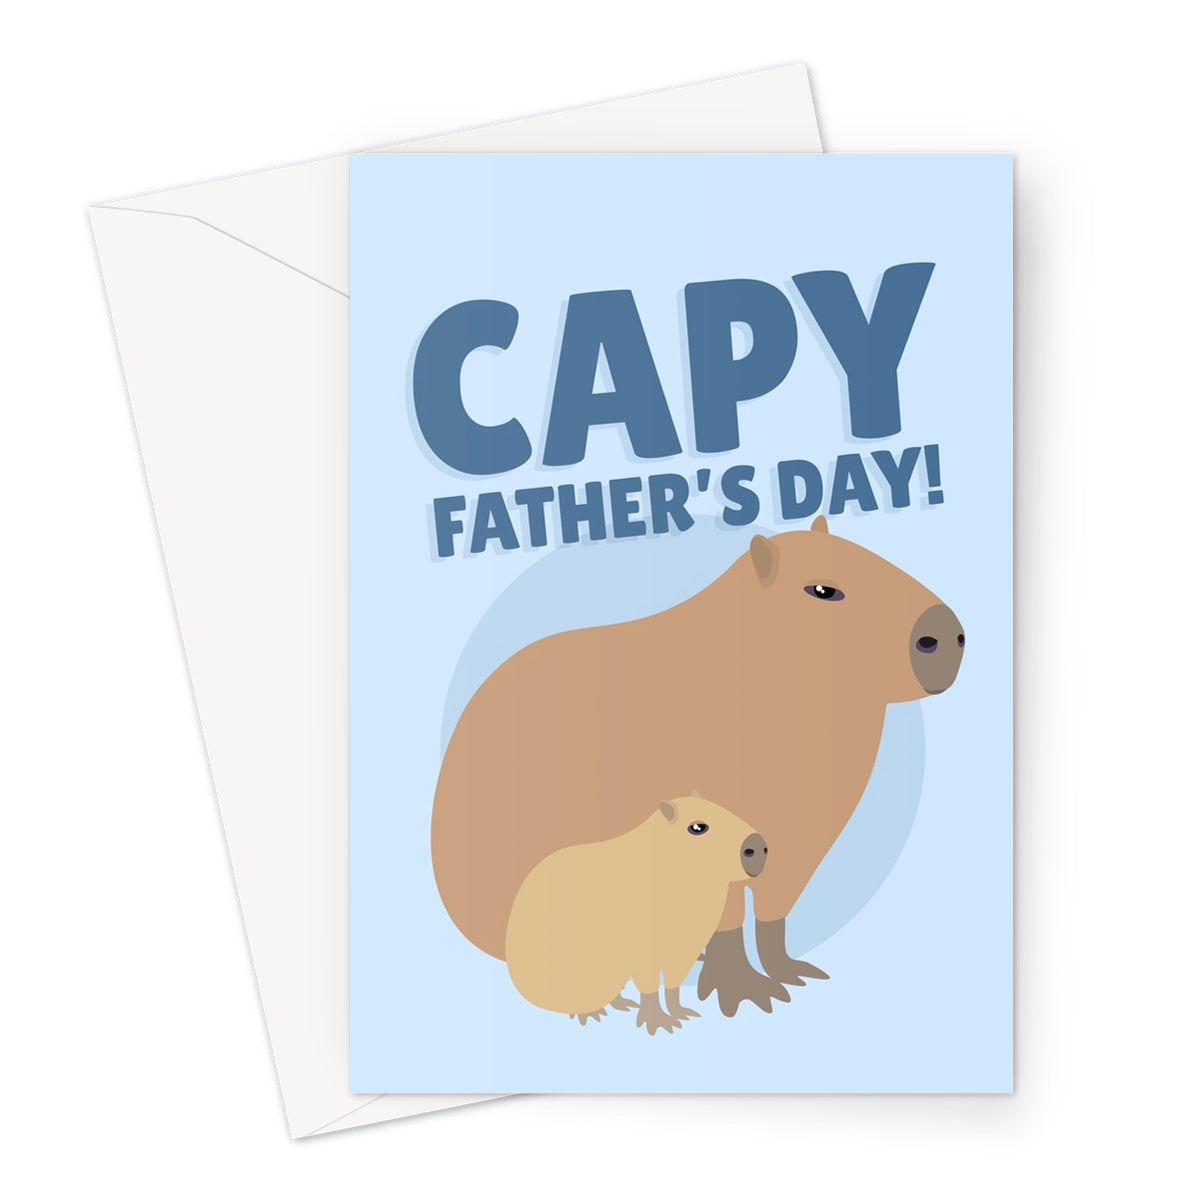 Capy Father's Day Capybara Child Cute Love Nature Animals Zoo Greeting Card